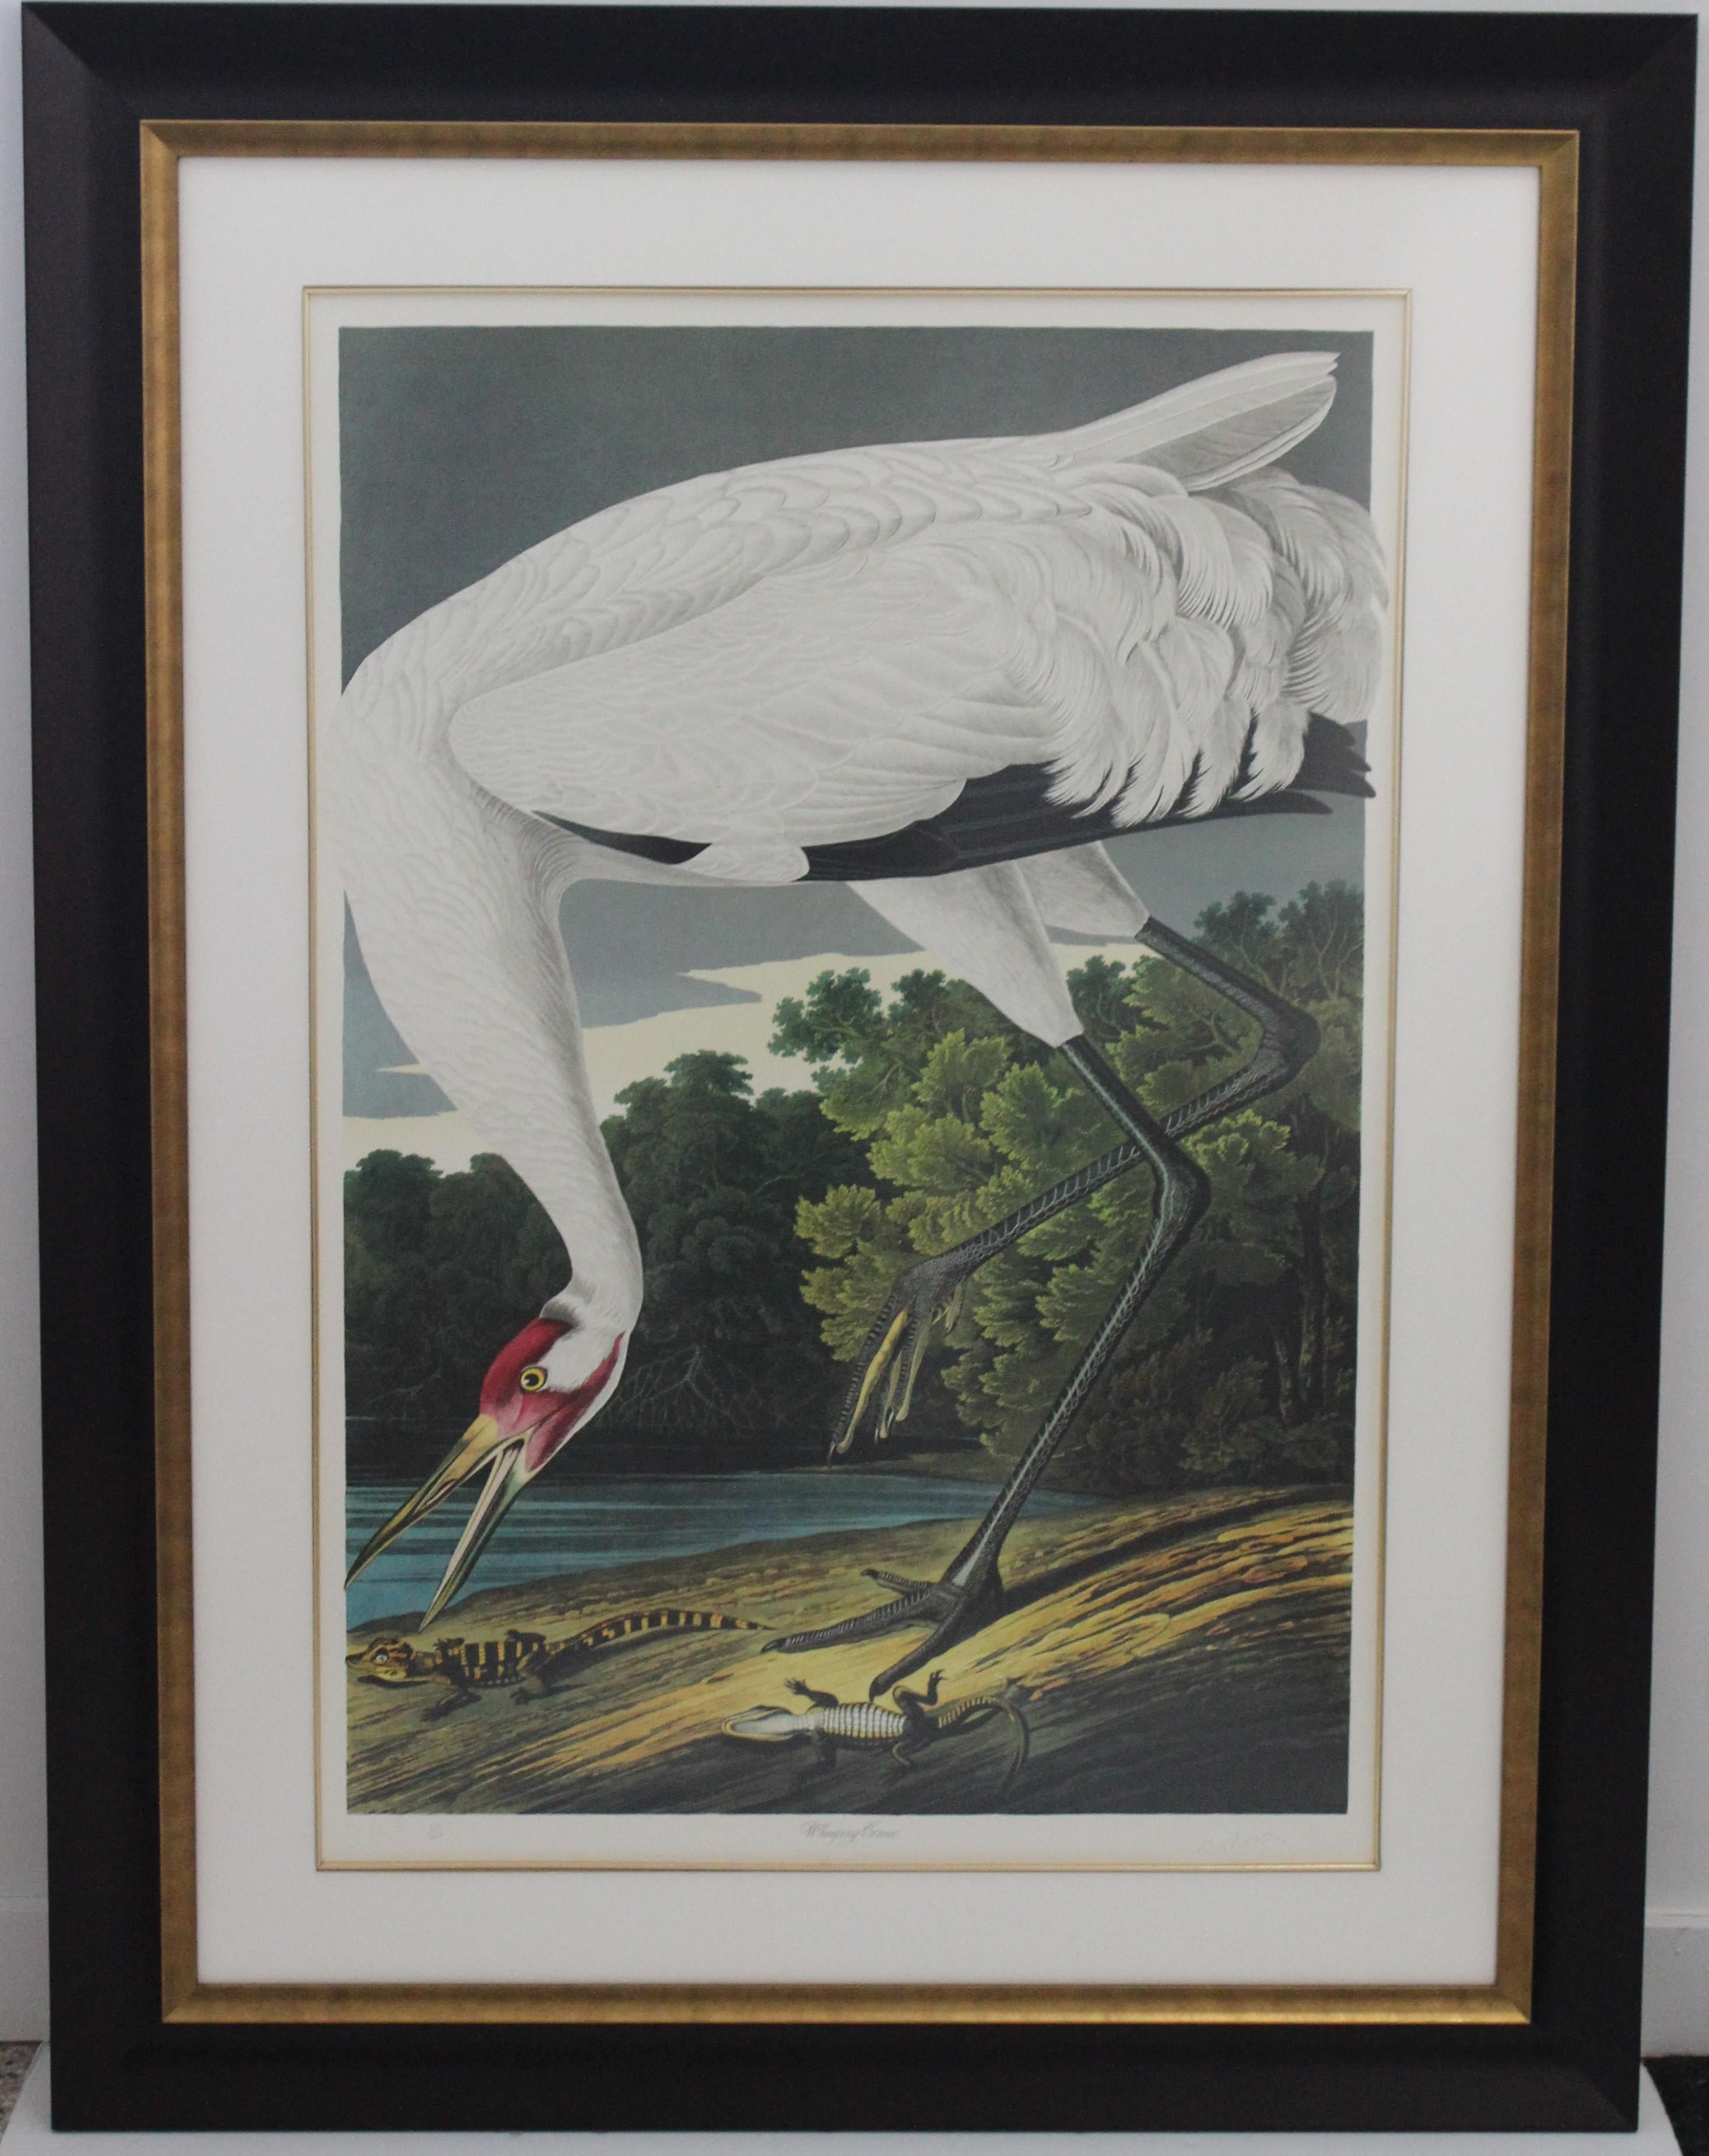 After John James Audubon Print of Whooping Crane in Ltd Edition of 1000 by master print maker M Bernard Loates newly framed in custom archival framing.

About:
Limited Edition Audubon print from The Birds of America series by Master Lithographer M.